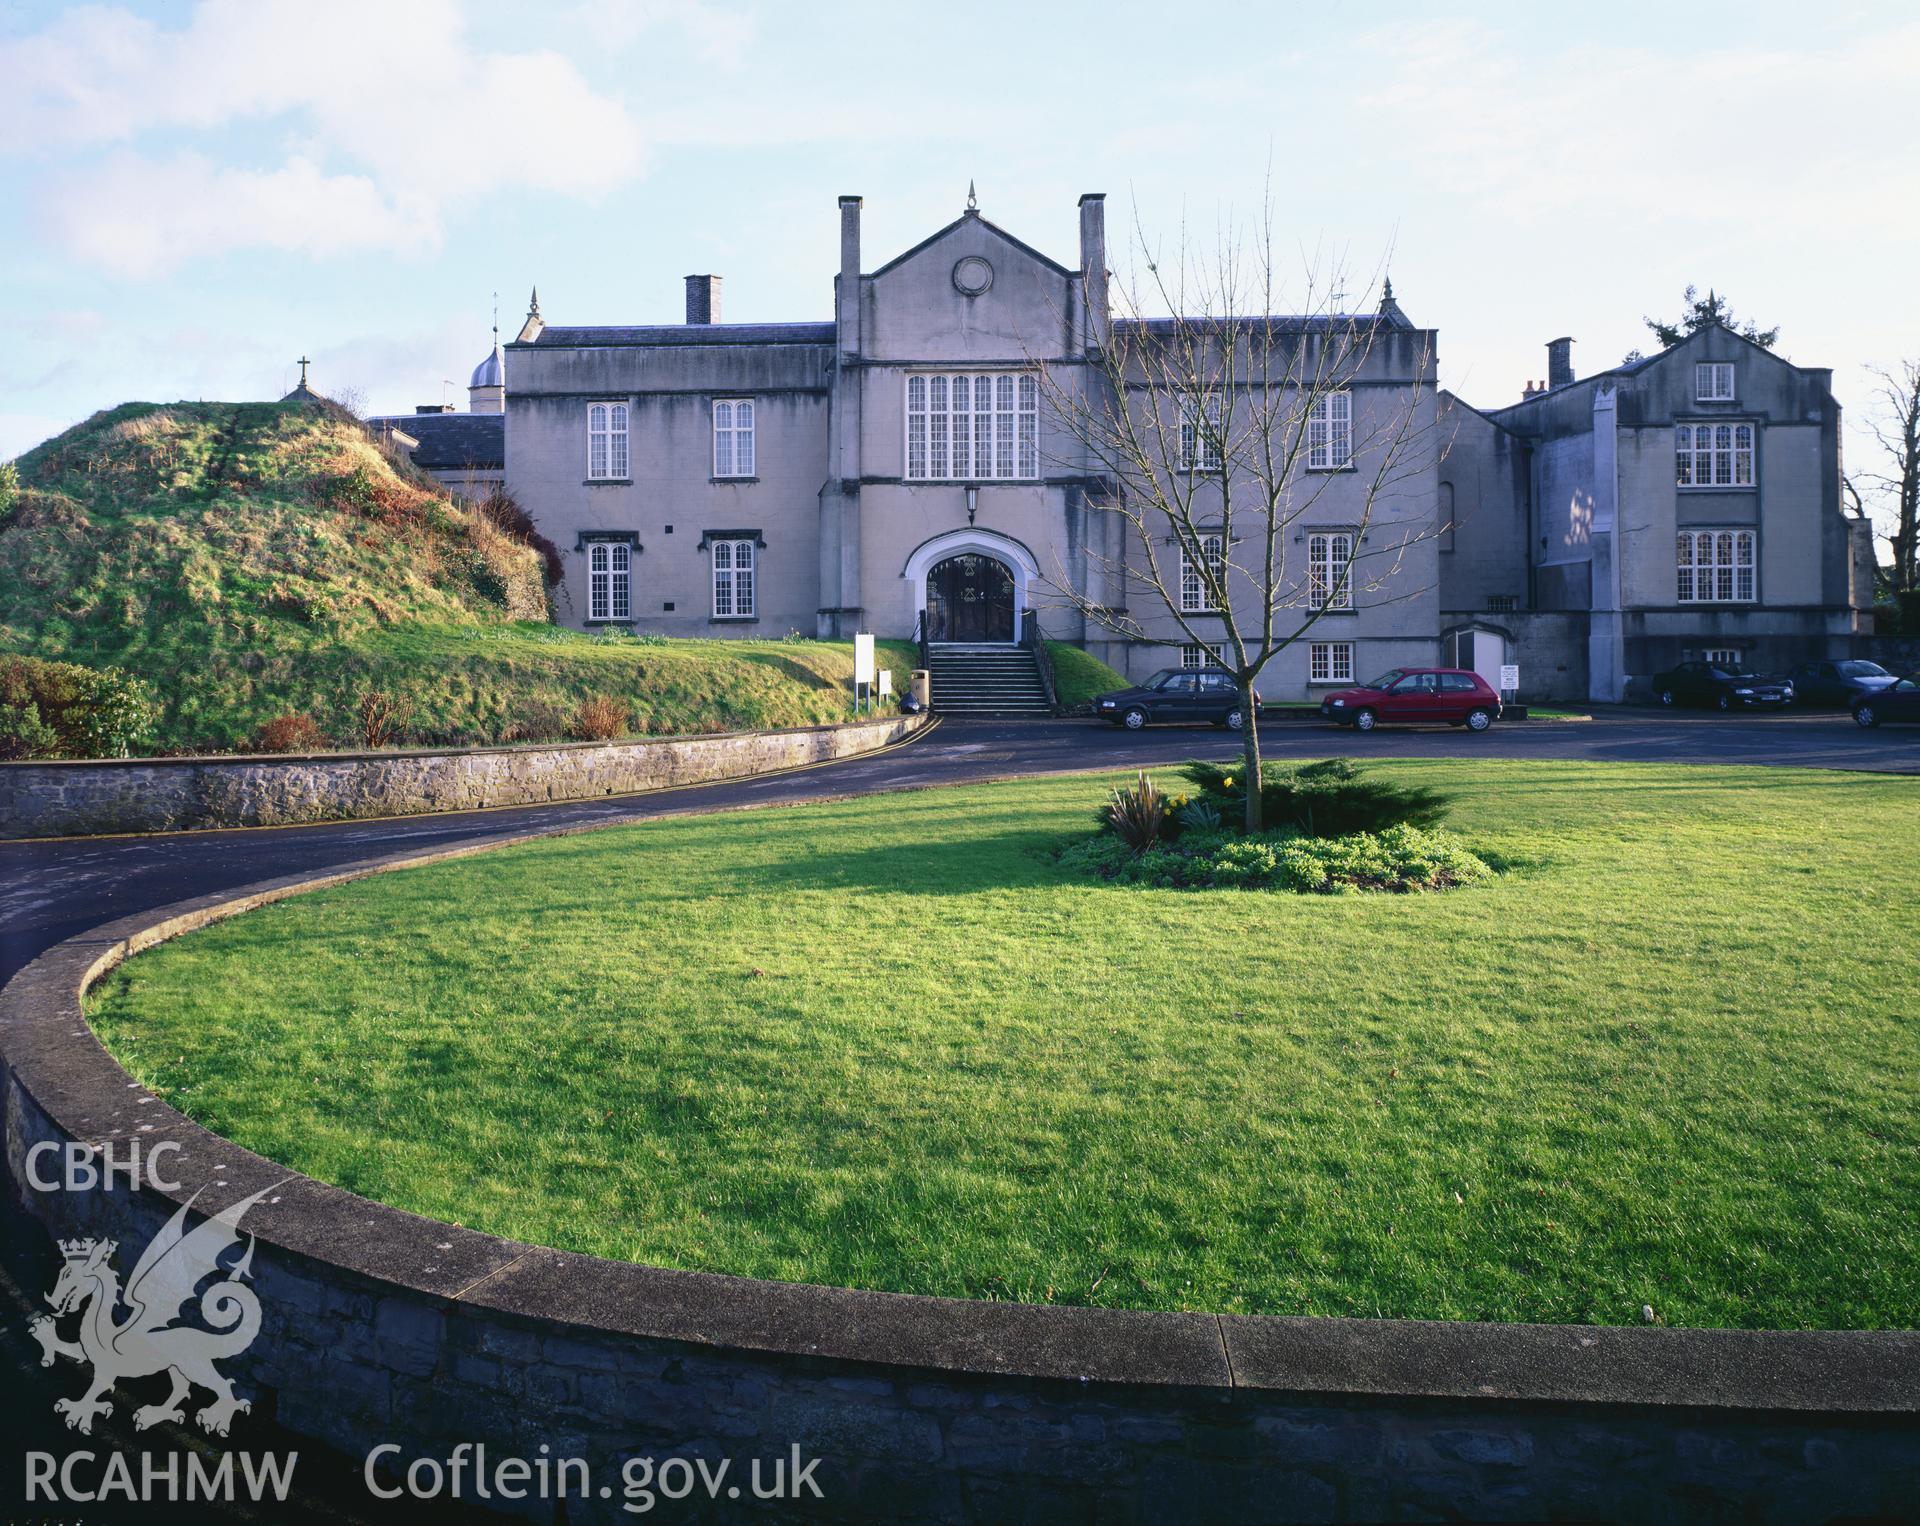 RCAHMW colour transparency showing St David's College, Lampeter, taken by I.N. Wright, 2003